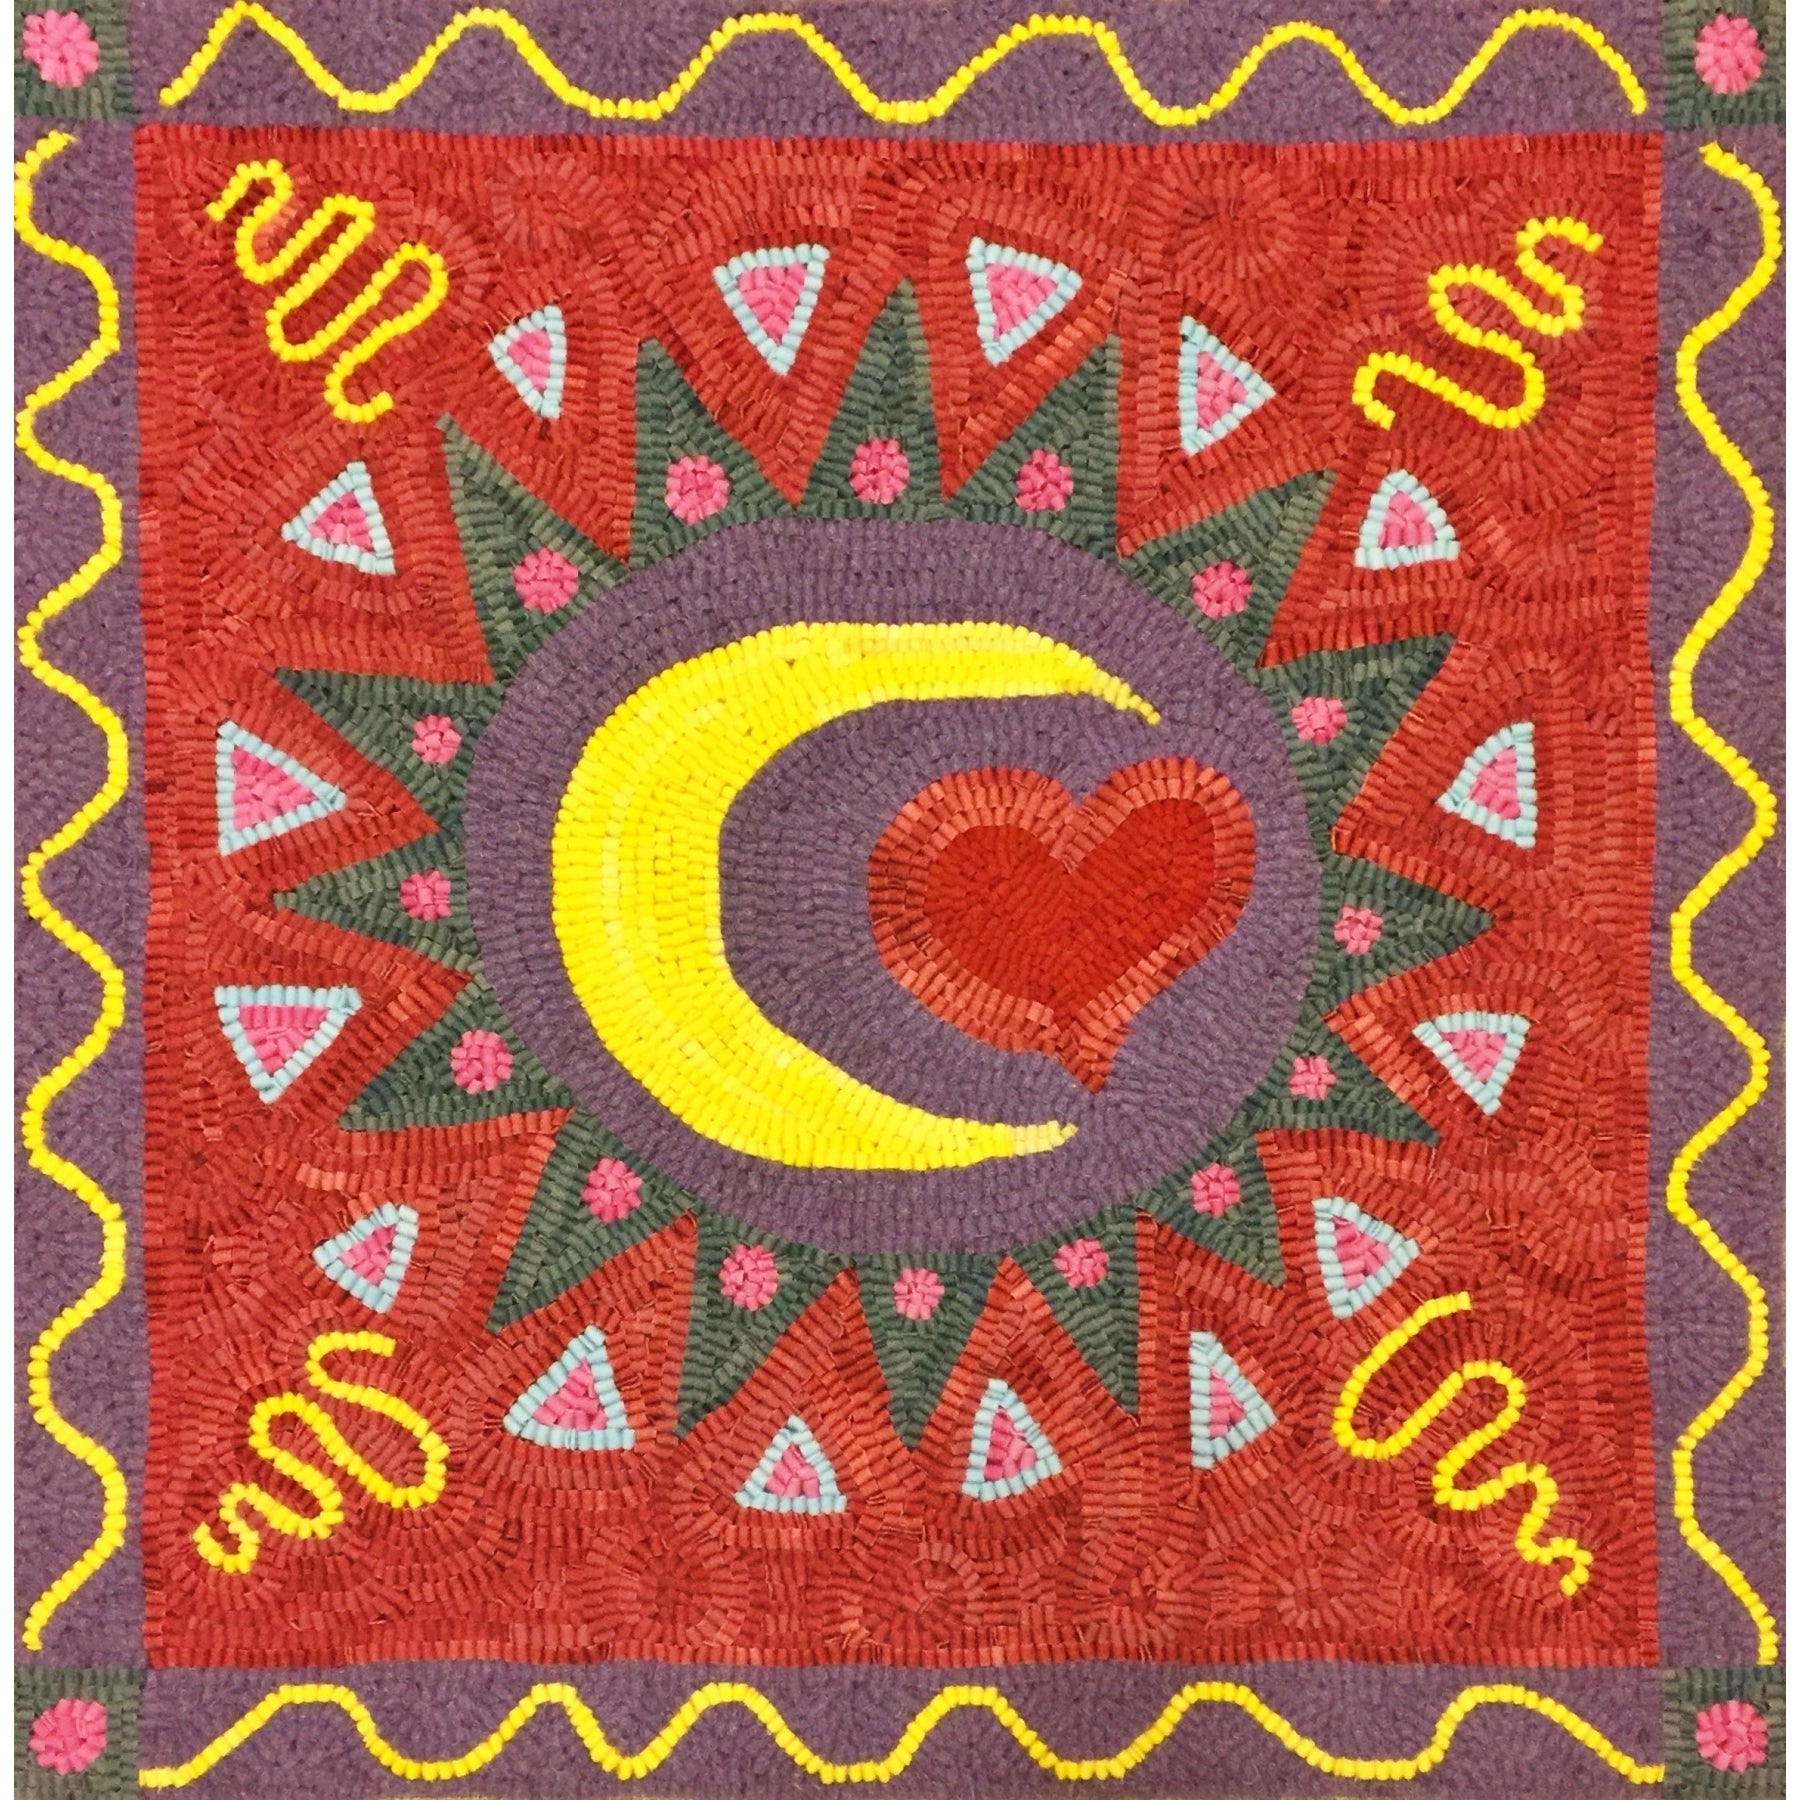 A World Of Love, rug hooked by Delaine Miller